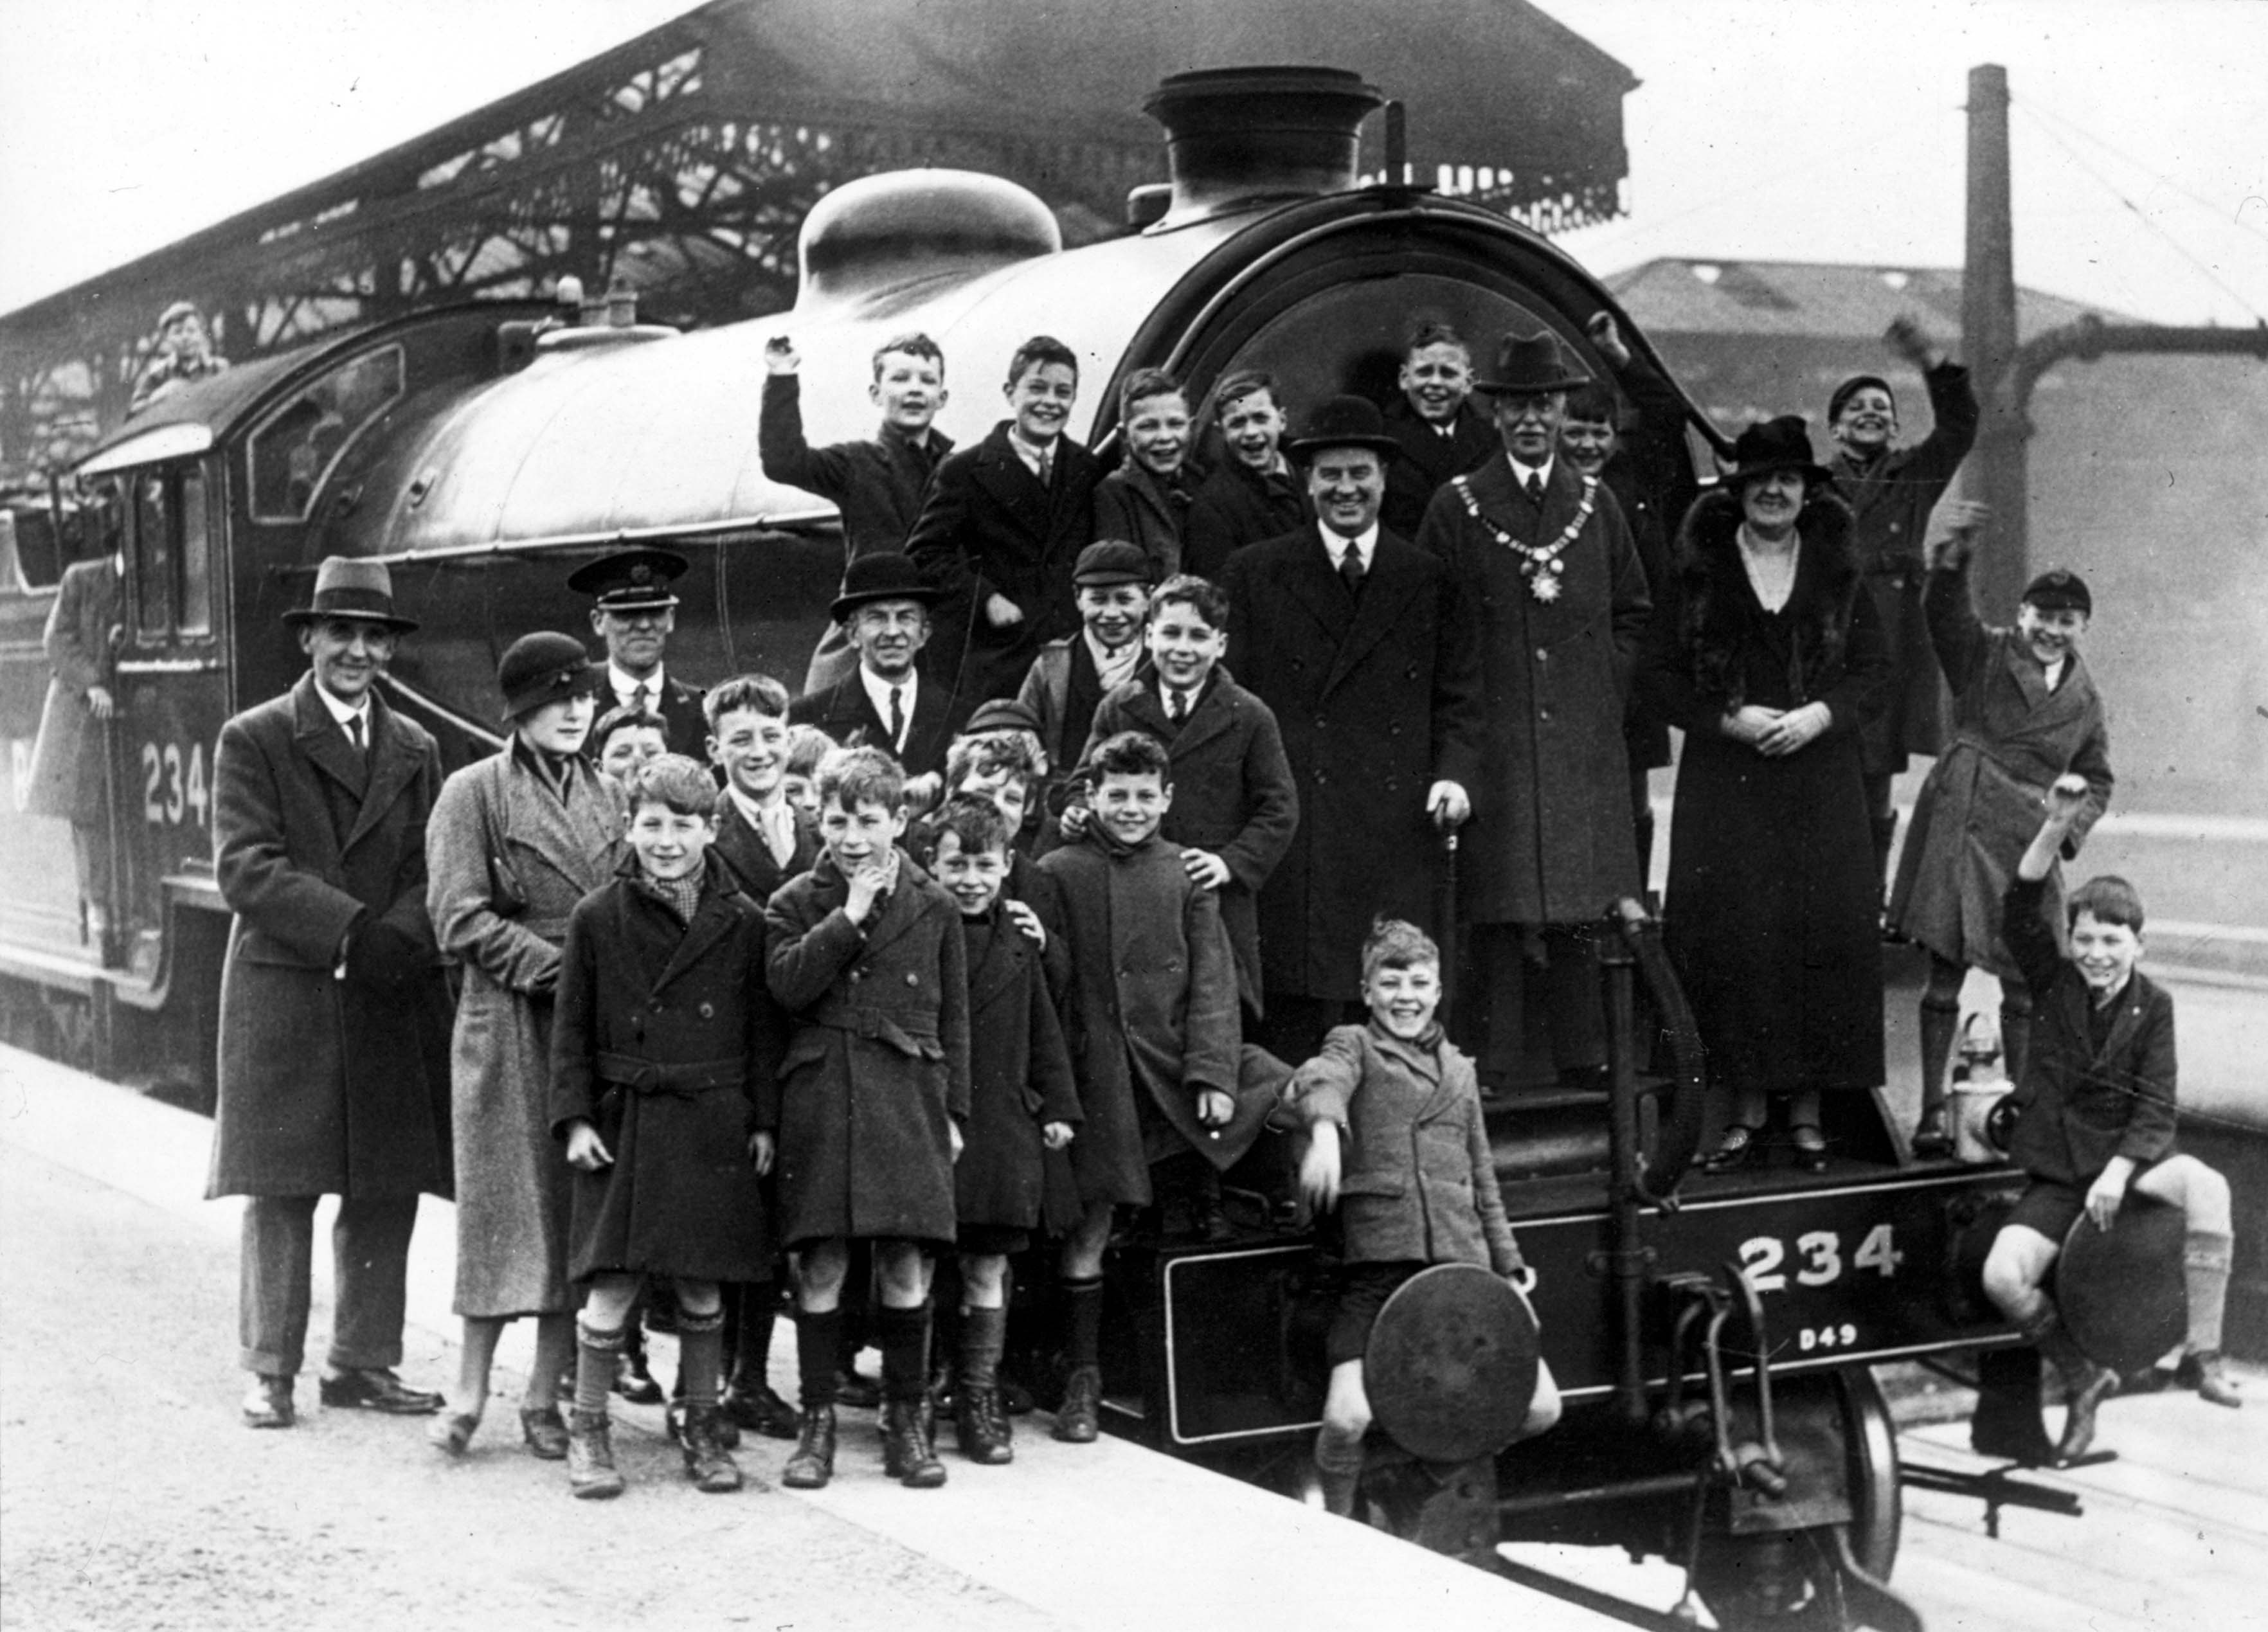 A group of schoolboys pictured with the Mayor and Mayoress Mr and Mrs Hamilton on the front of a steam train in Harrogate Station c1935